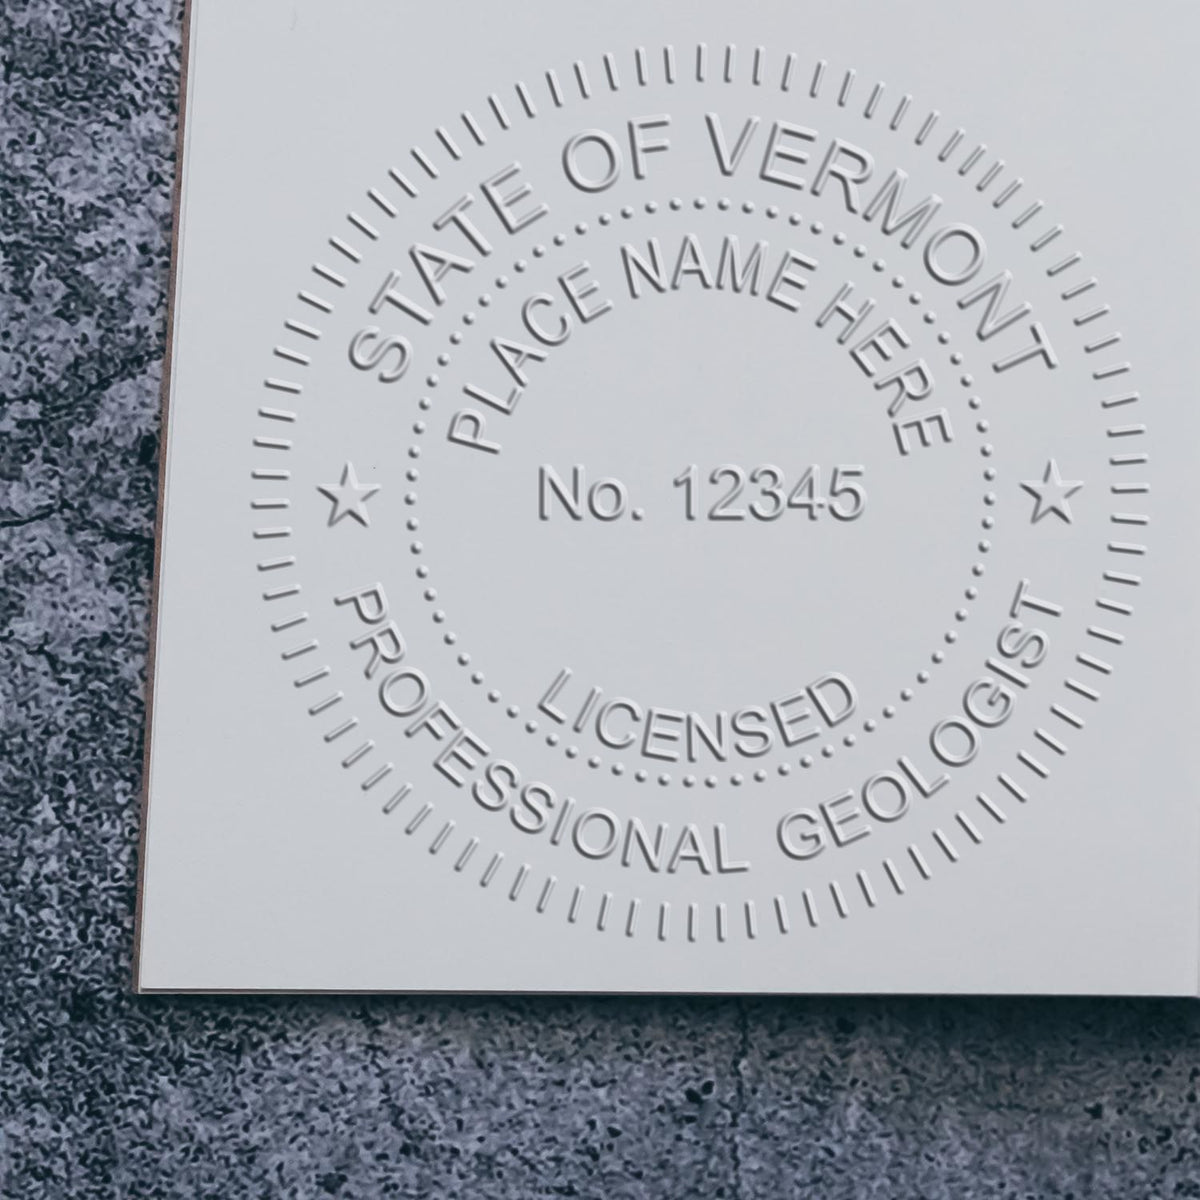 Another Example of a stamped impression of the Handheld Vermont Professional Geologist Embosser on a office form